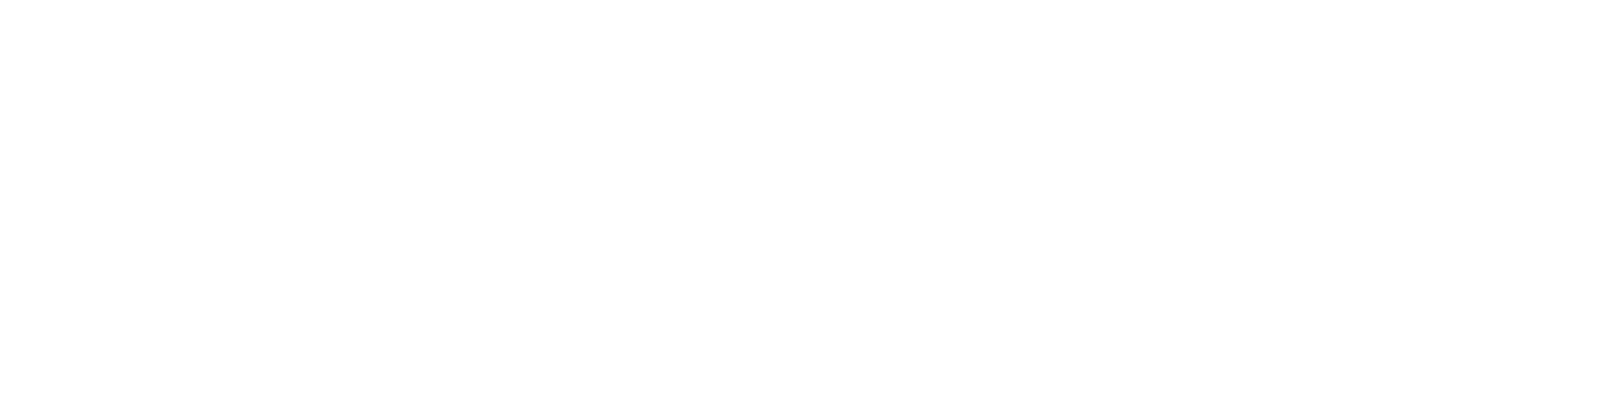 High quality, evidence based, human centered health podcasts.